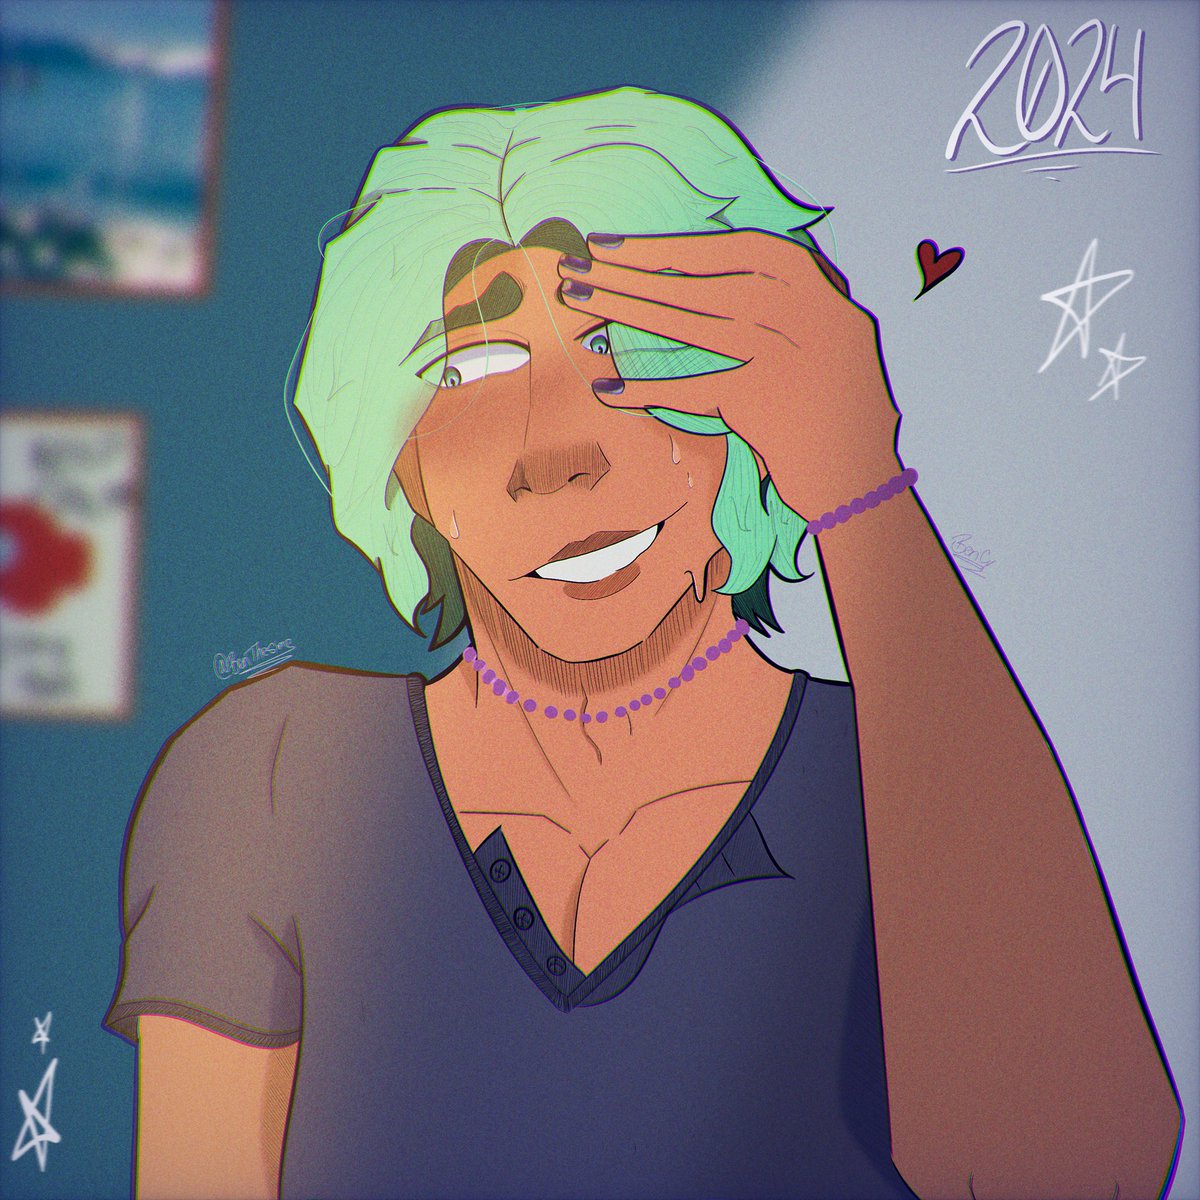 did a redraw of an old piece from 2022 that was inspired by my moot @divinedraws ‼️ I feel like I’ve come a long way an I hope y’all like it🗣️🙏🏾‼️ #OurLifeBeginningsAndAlways #Ourlifenowandforever #CoveHolden #fanart #redraw #ourlife #coveholden